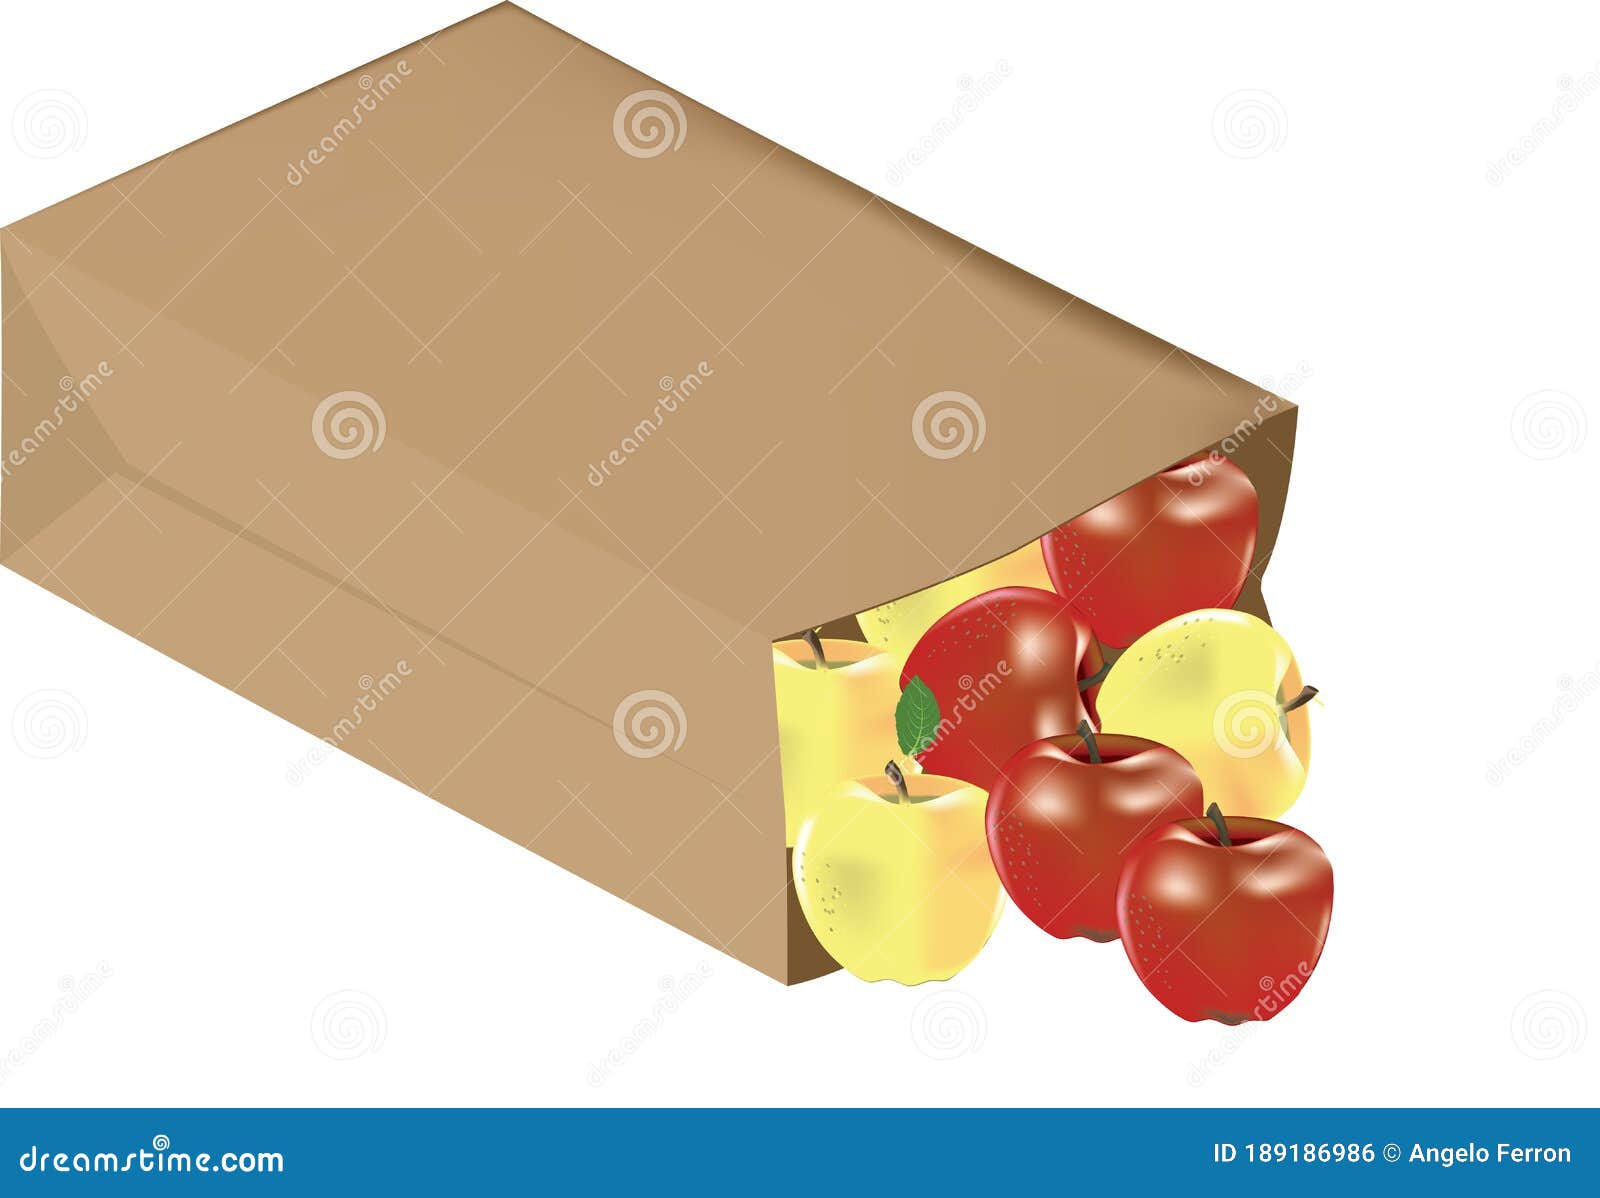 paper bag of organic bread containing fruit